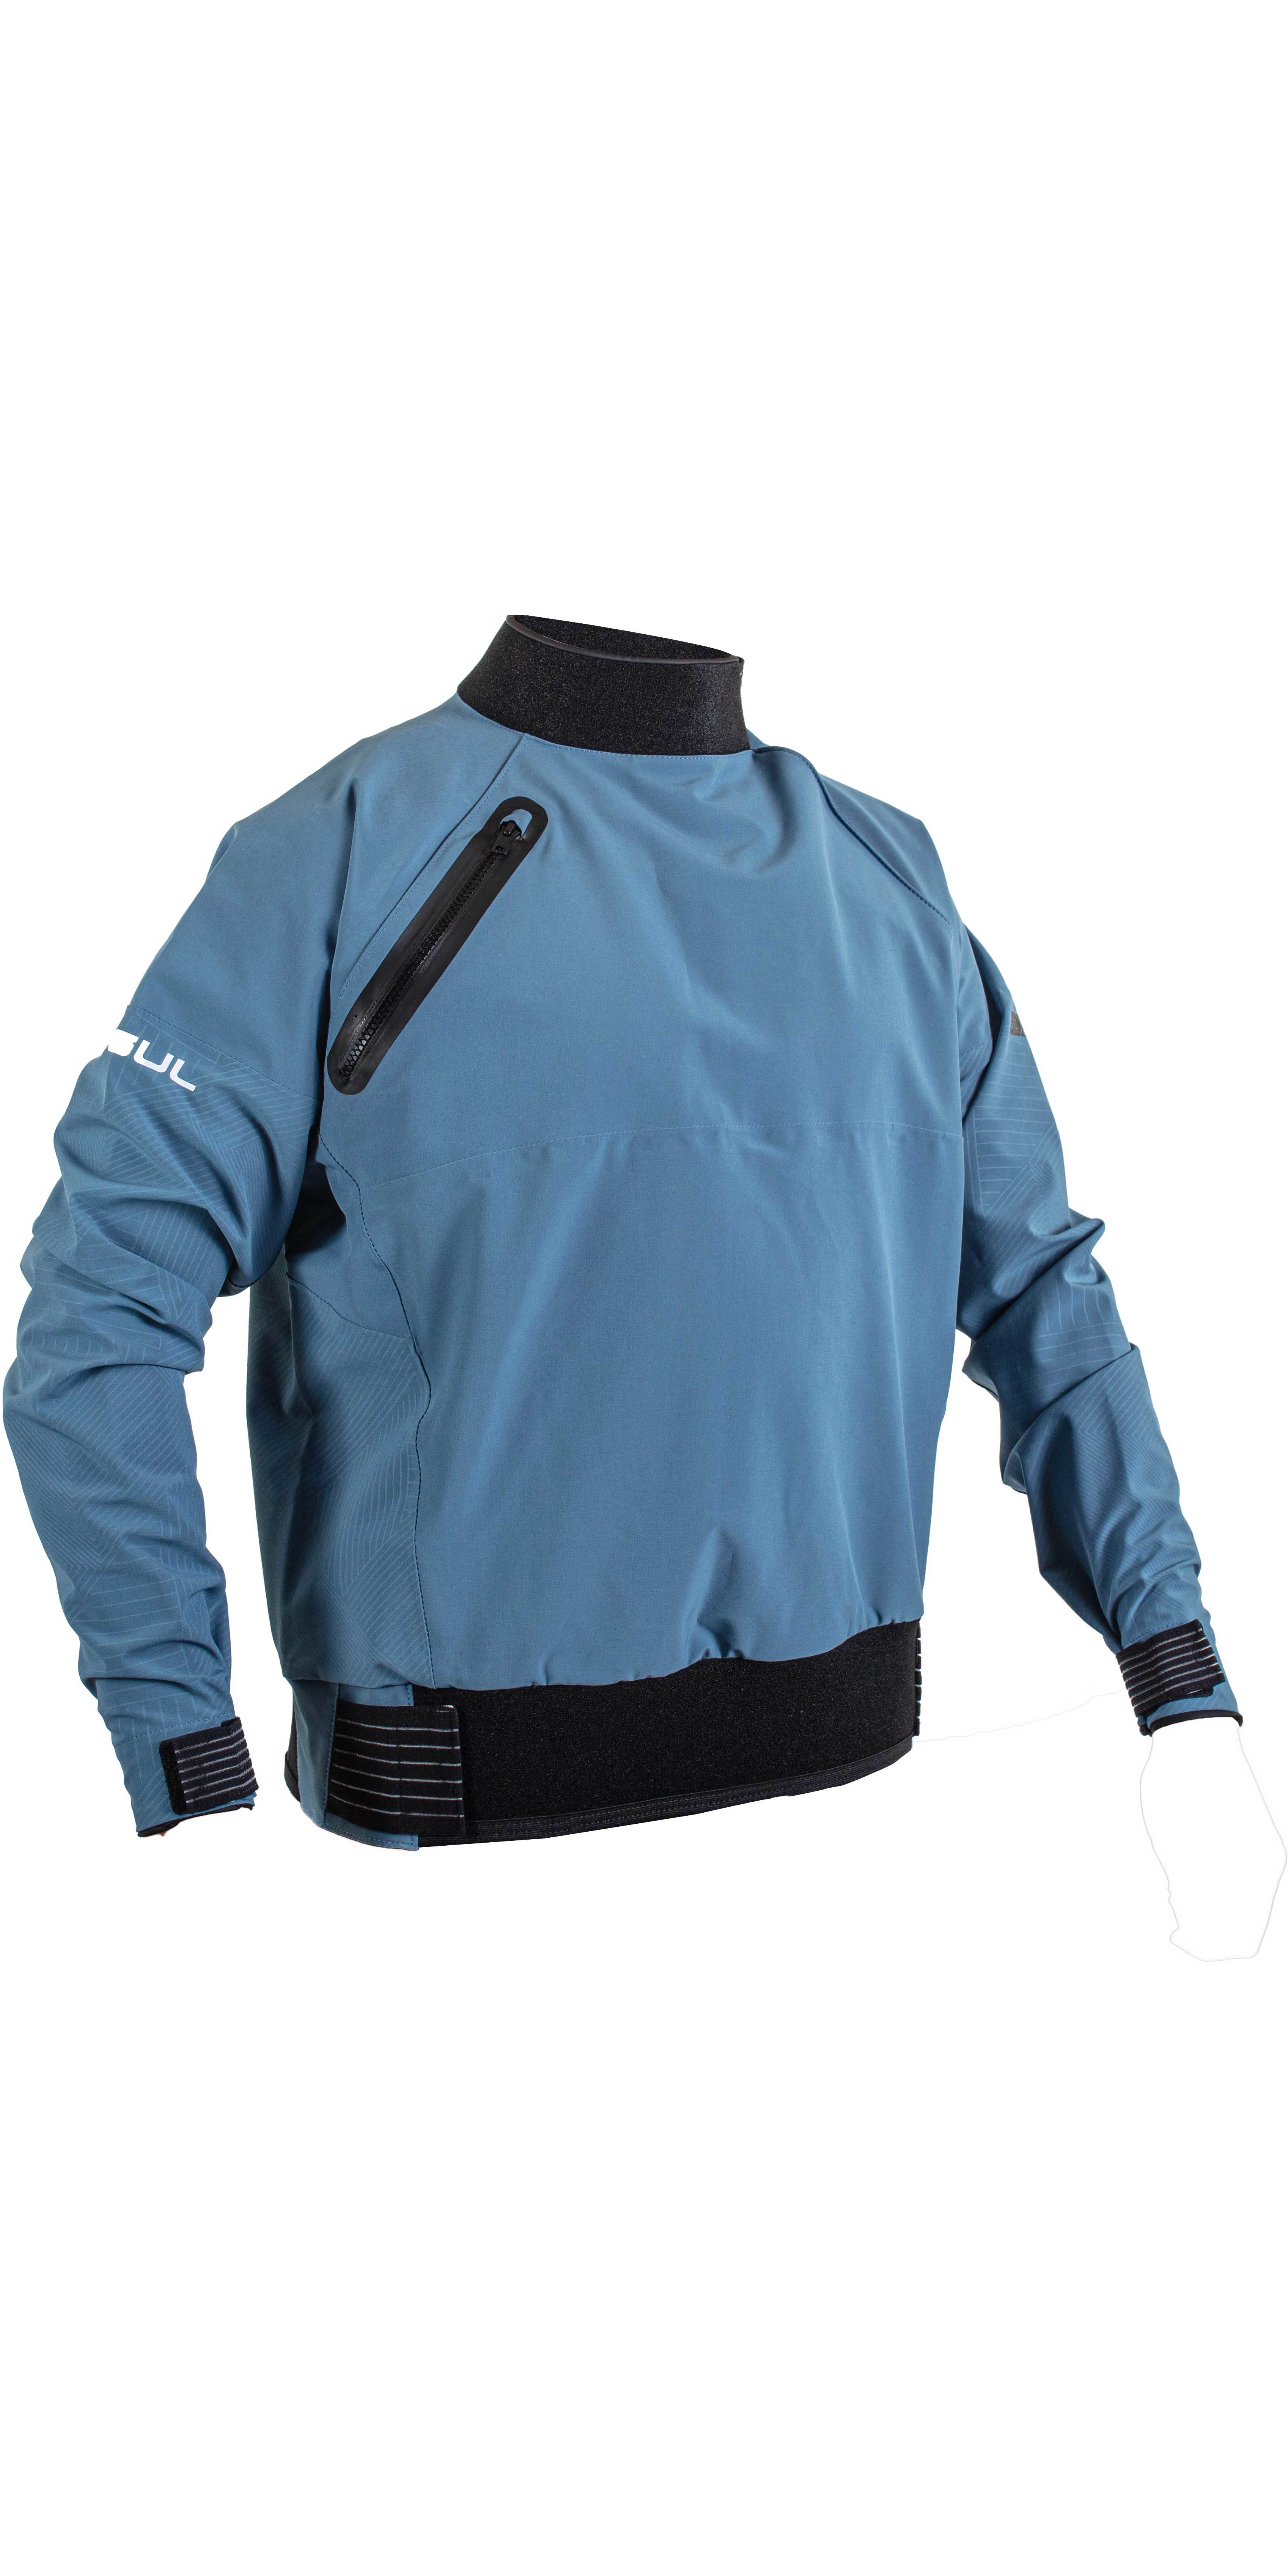 2023 Gul Gamma Tapet Spray Top St0021-b9 - / - ST0021-B9 - Sejlads | Watersports Outlet